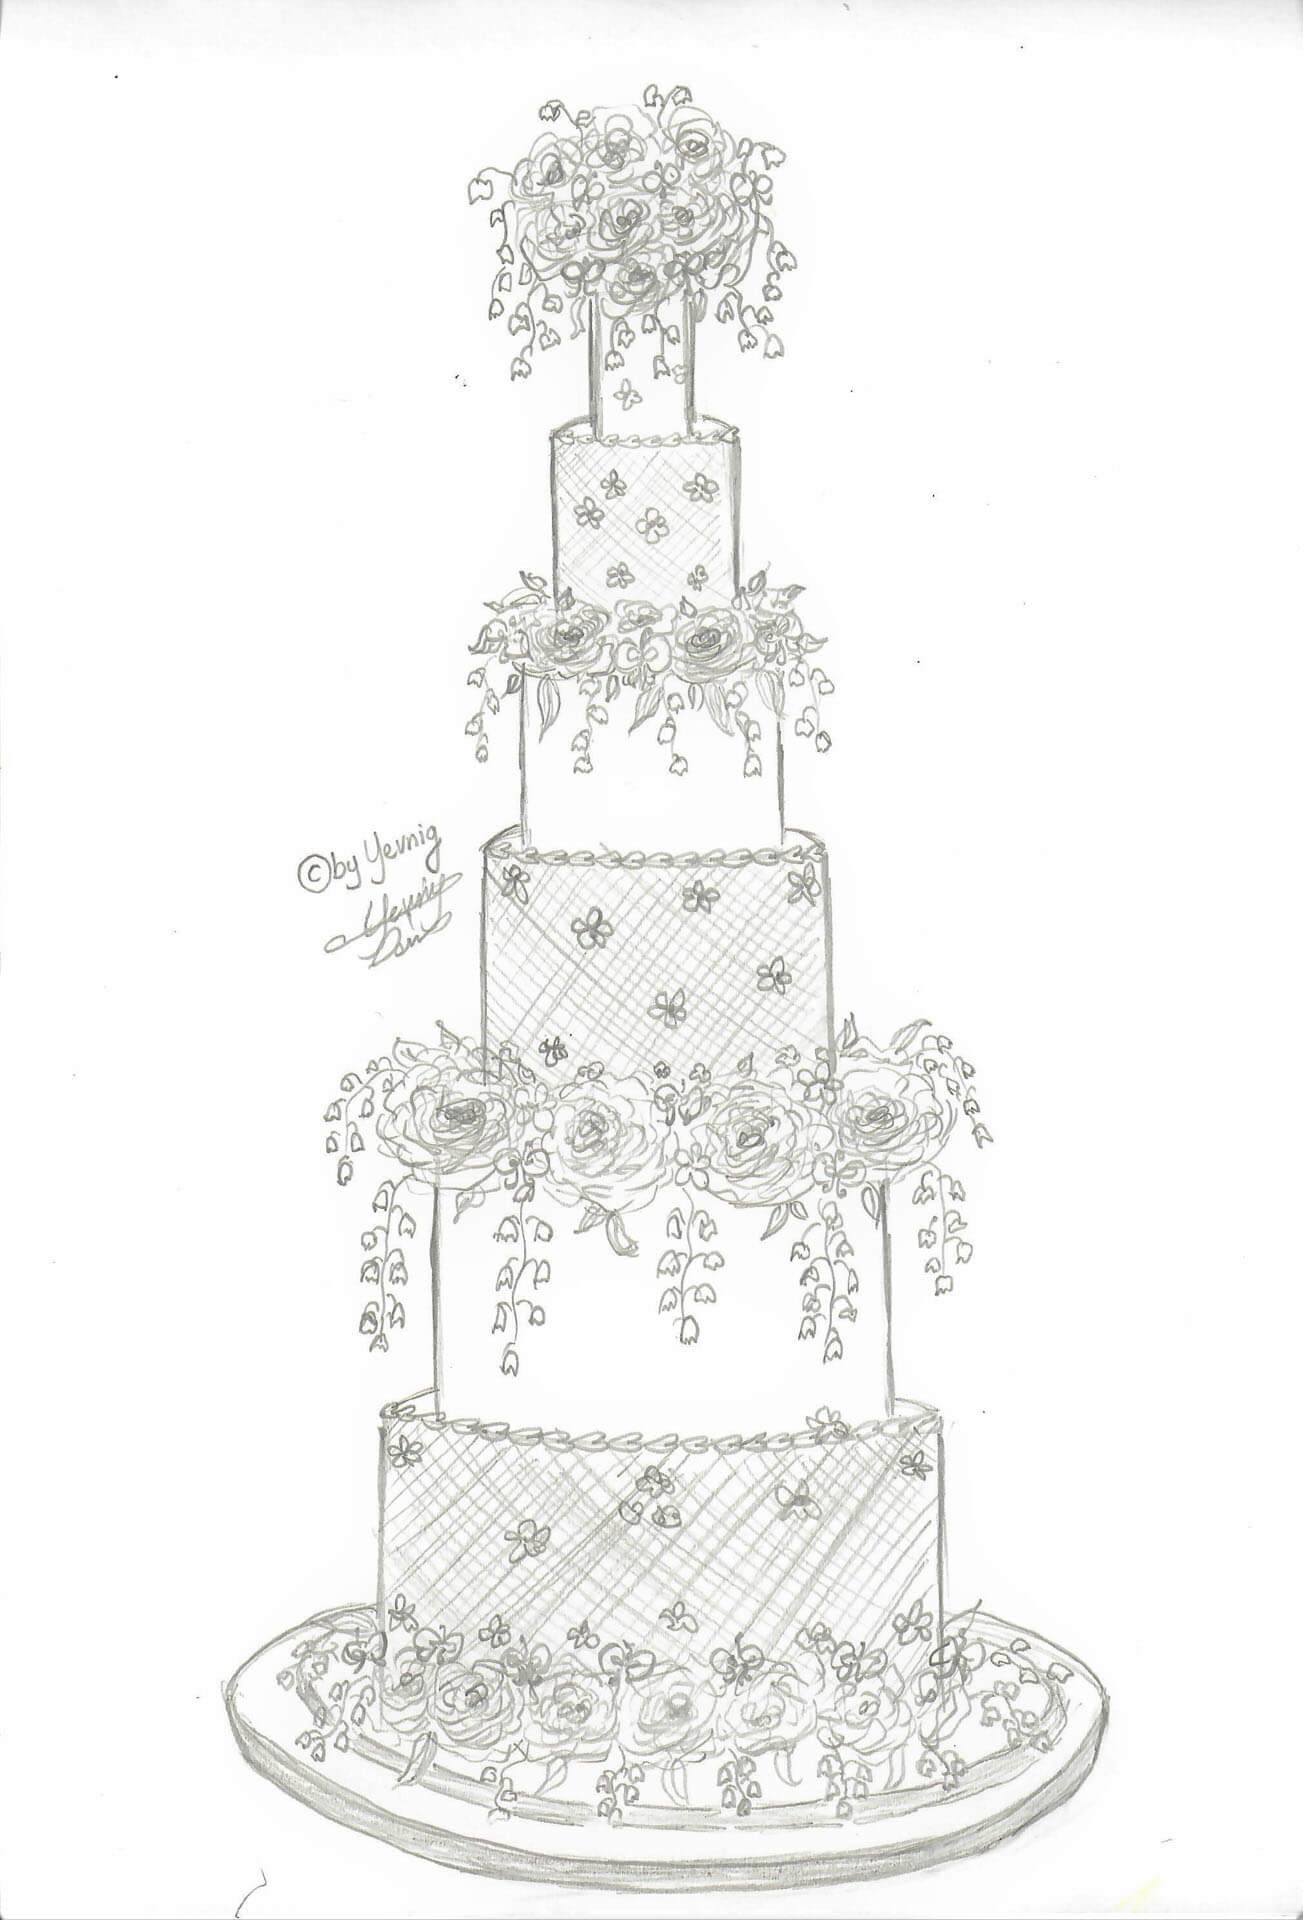 Your By Yevnig experience Luxury Wedding and occasion Cakes Arabella Sketch